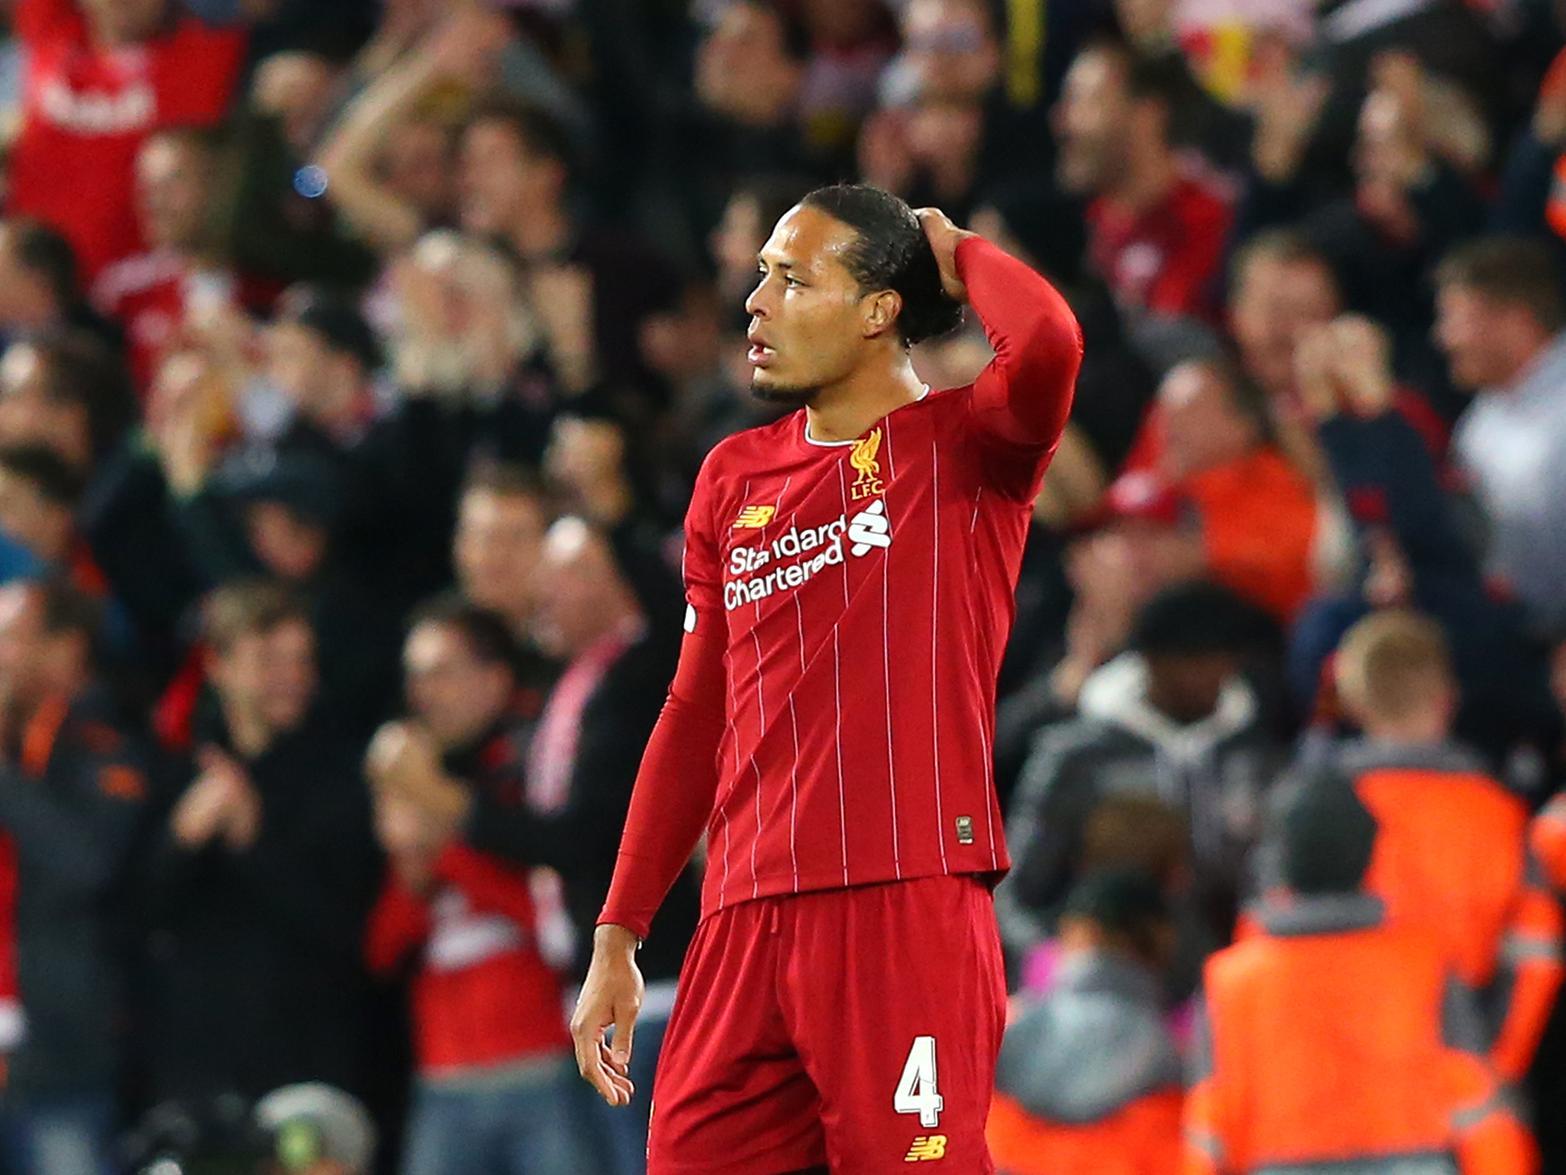 Despite numerous attempts by Real Madrid to lure him away, VVD is going nowhere! He's proudly wearing the captain's armband, and is showing no signs of declining despite now being 33.